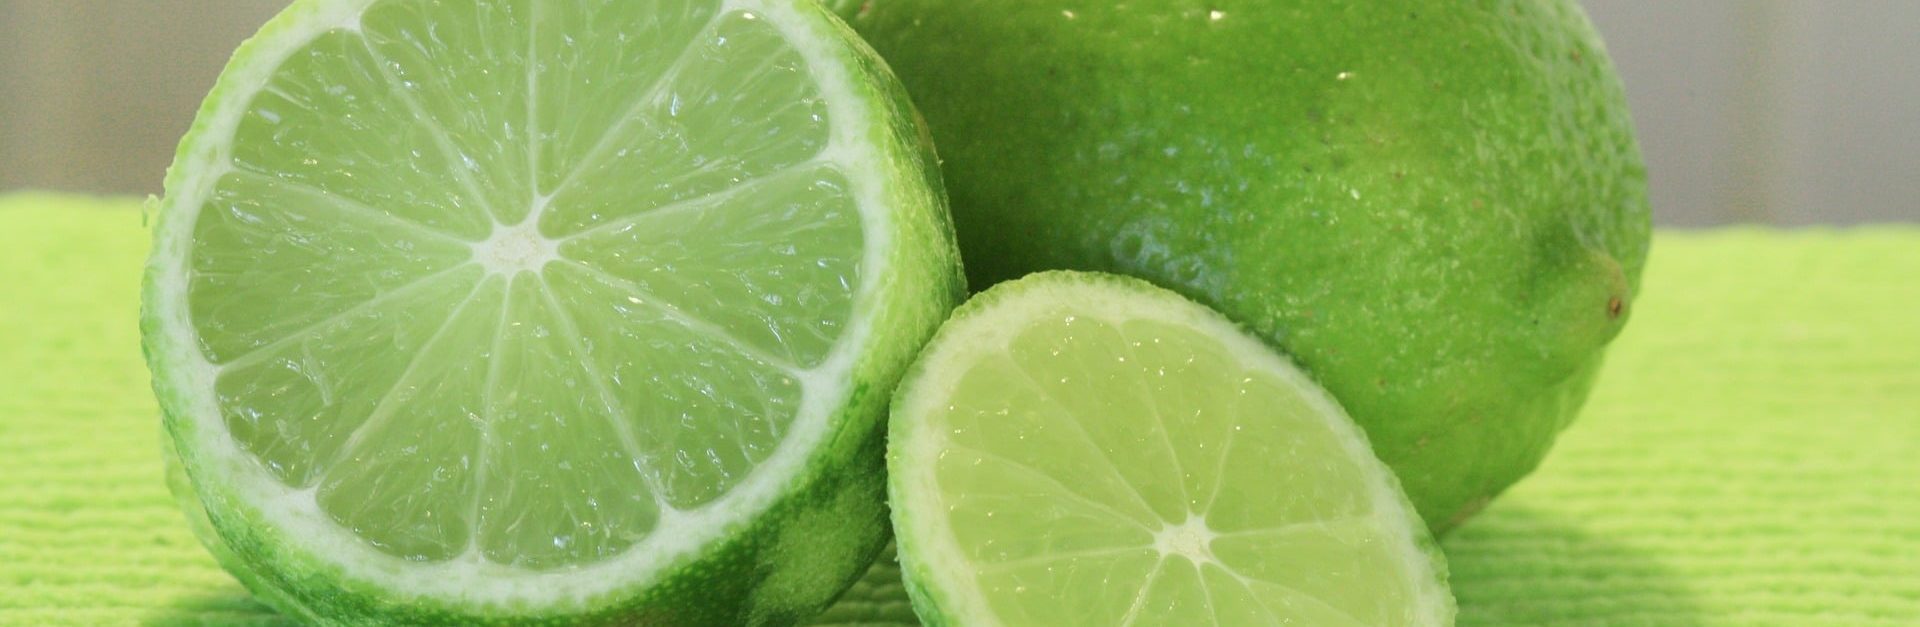 lime juice substitutes